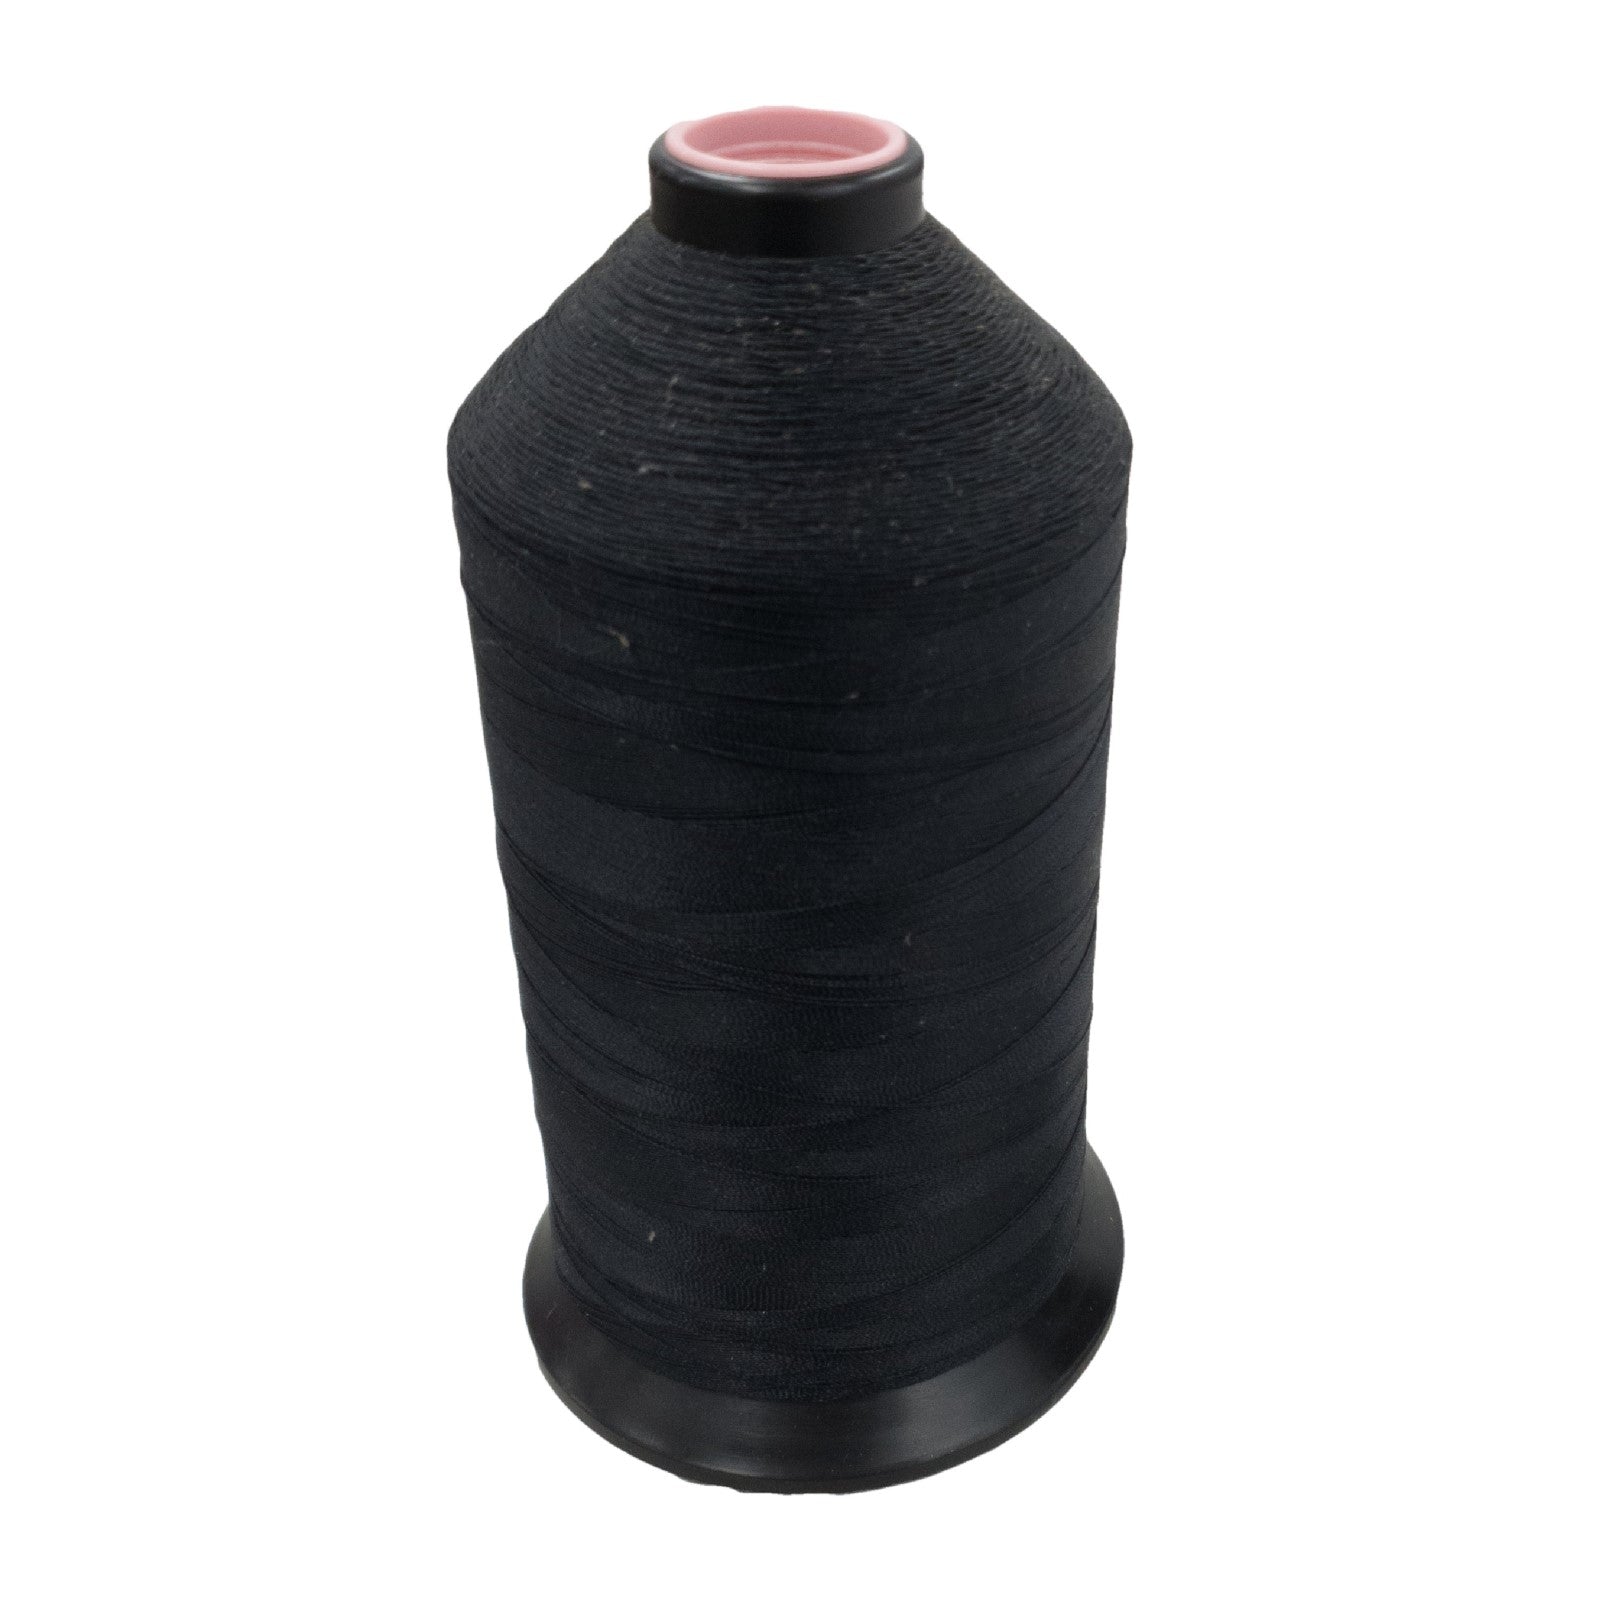 Bonded Nylon Sewing Thread T270 V-277 800yds for Outdoor, Leather (Black)